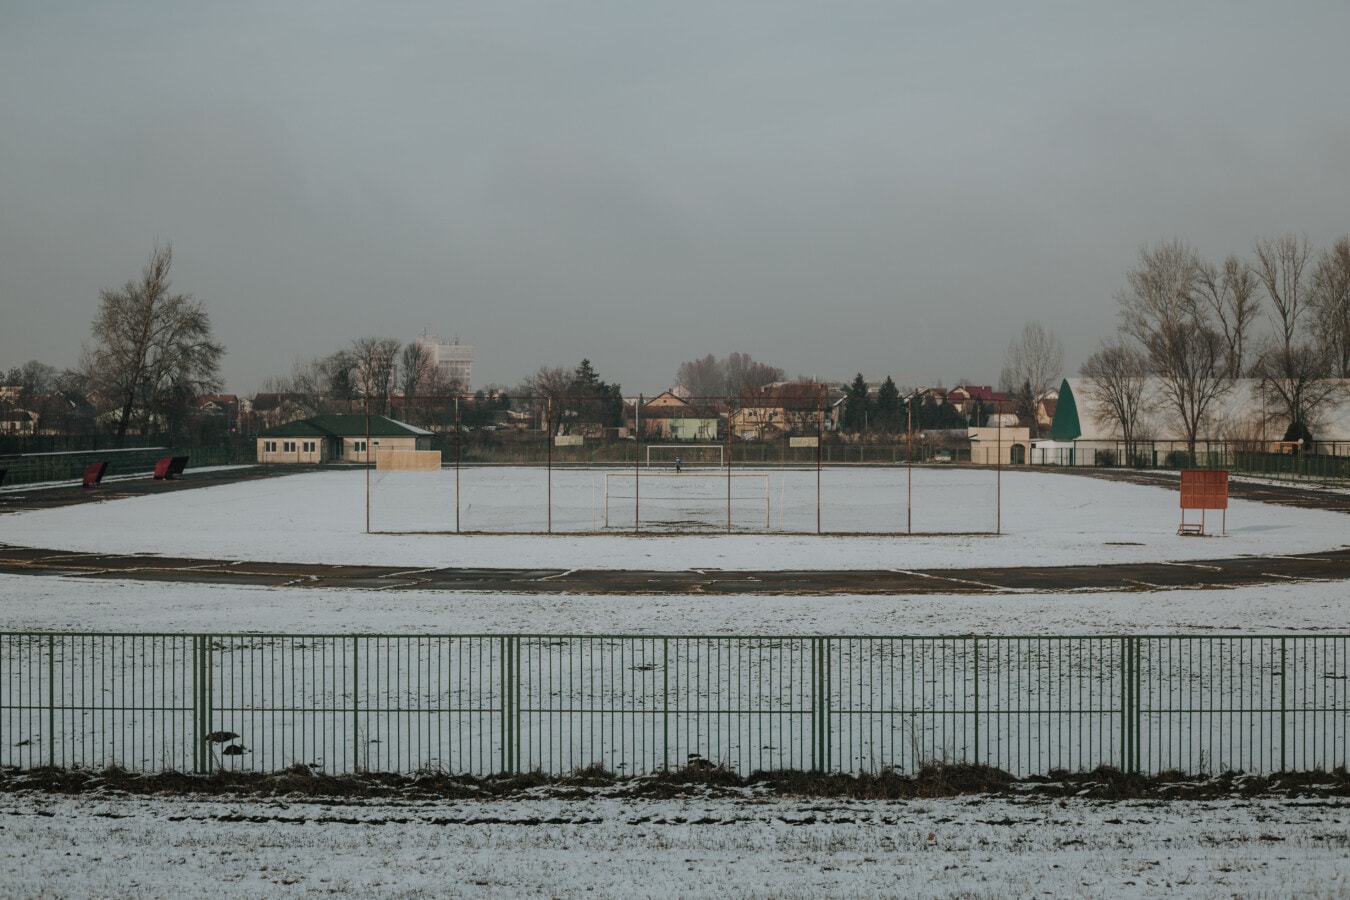 winter, empty, stadium, football, snow, water, cold, landscape, frost, fence